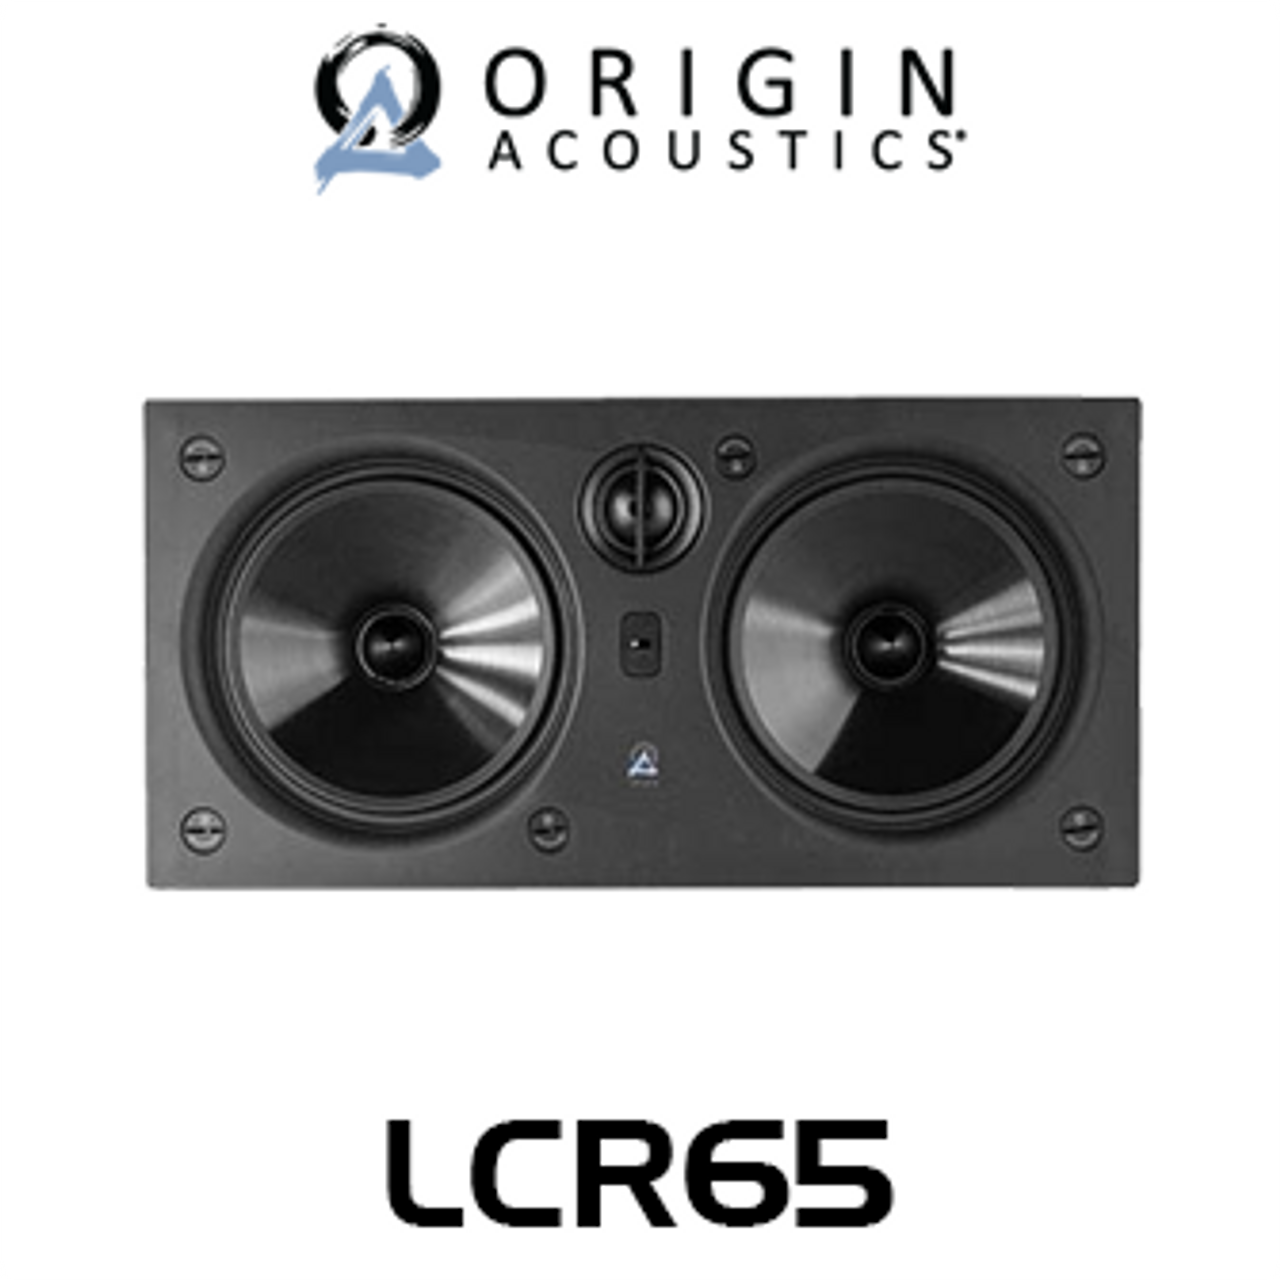 Origin Acoustics Composer LCR65 Dual 6.5" IMG In-Wall LCR Speaker (Each)